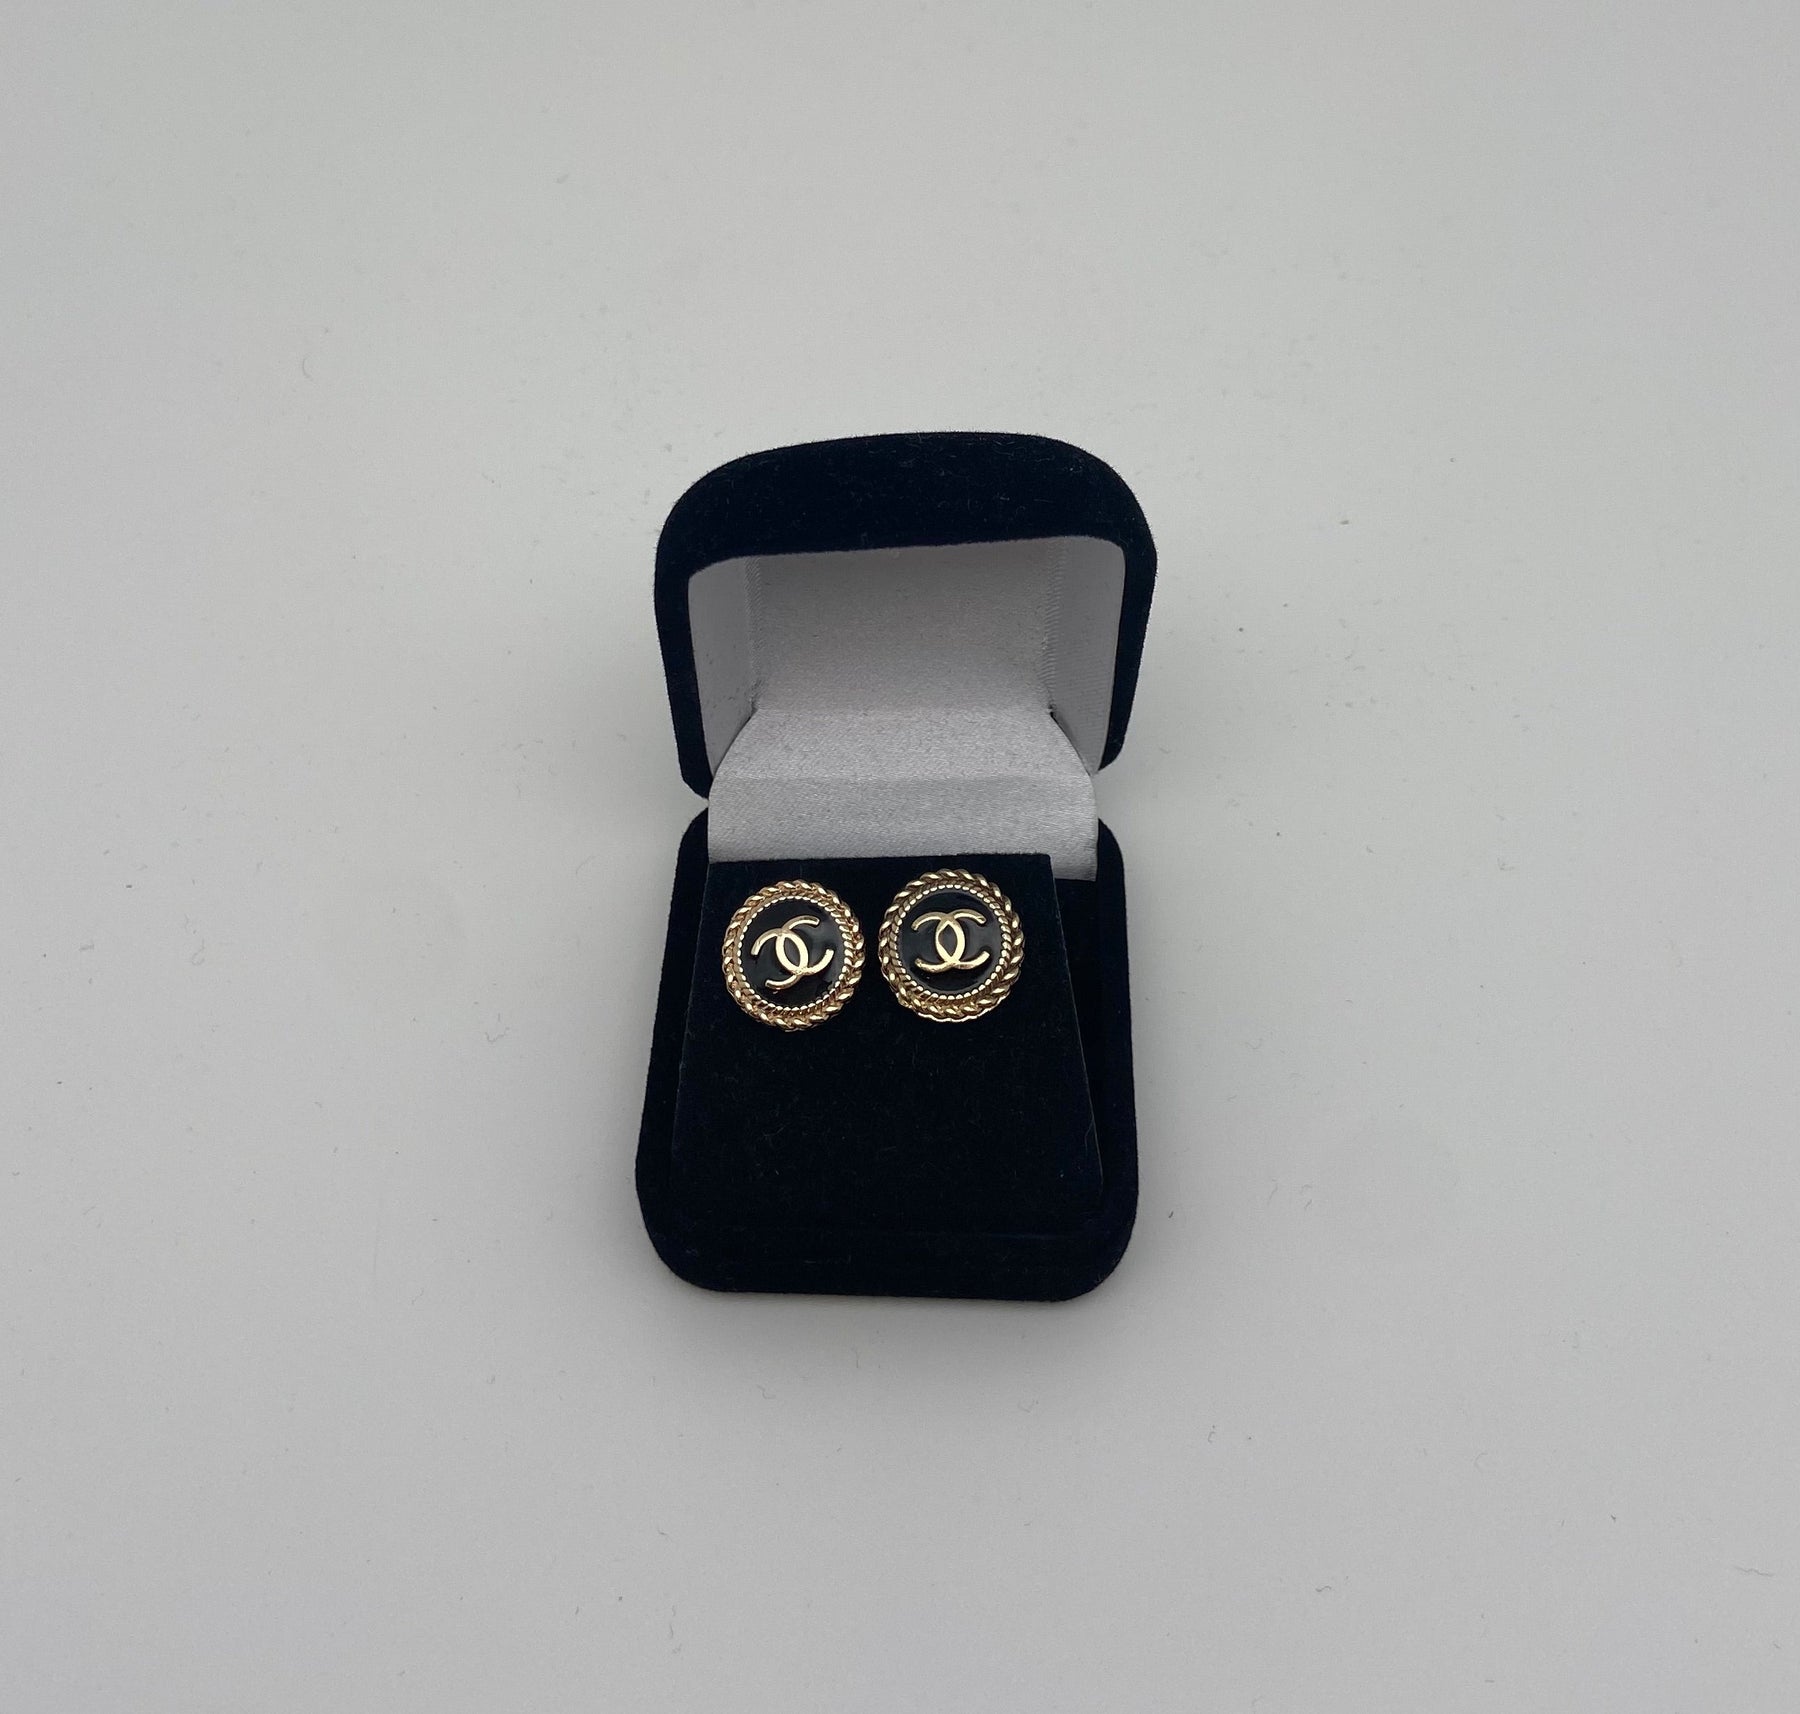 Black and gold Chanel button earrings